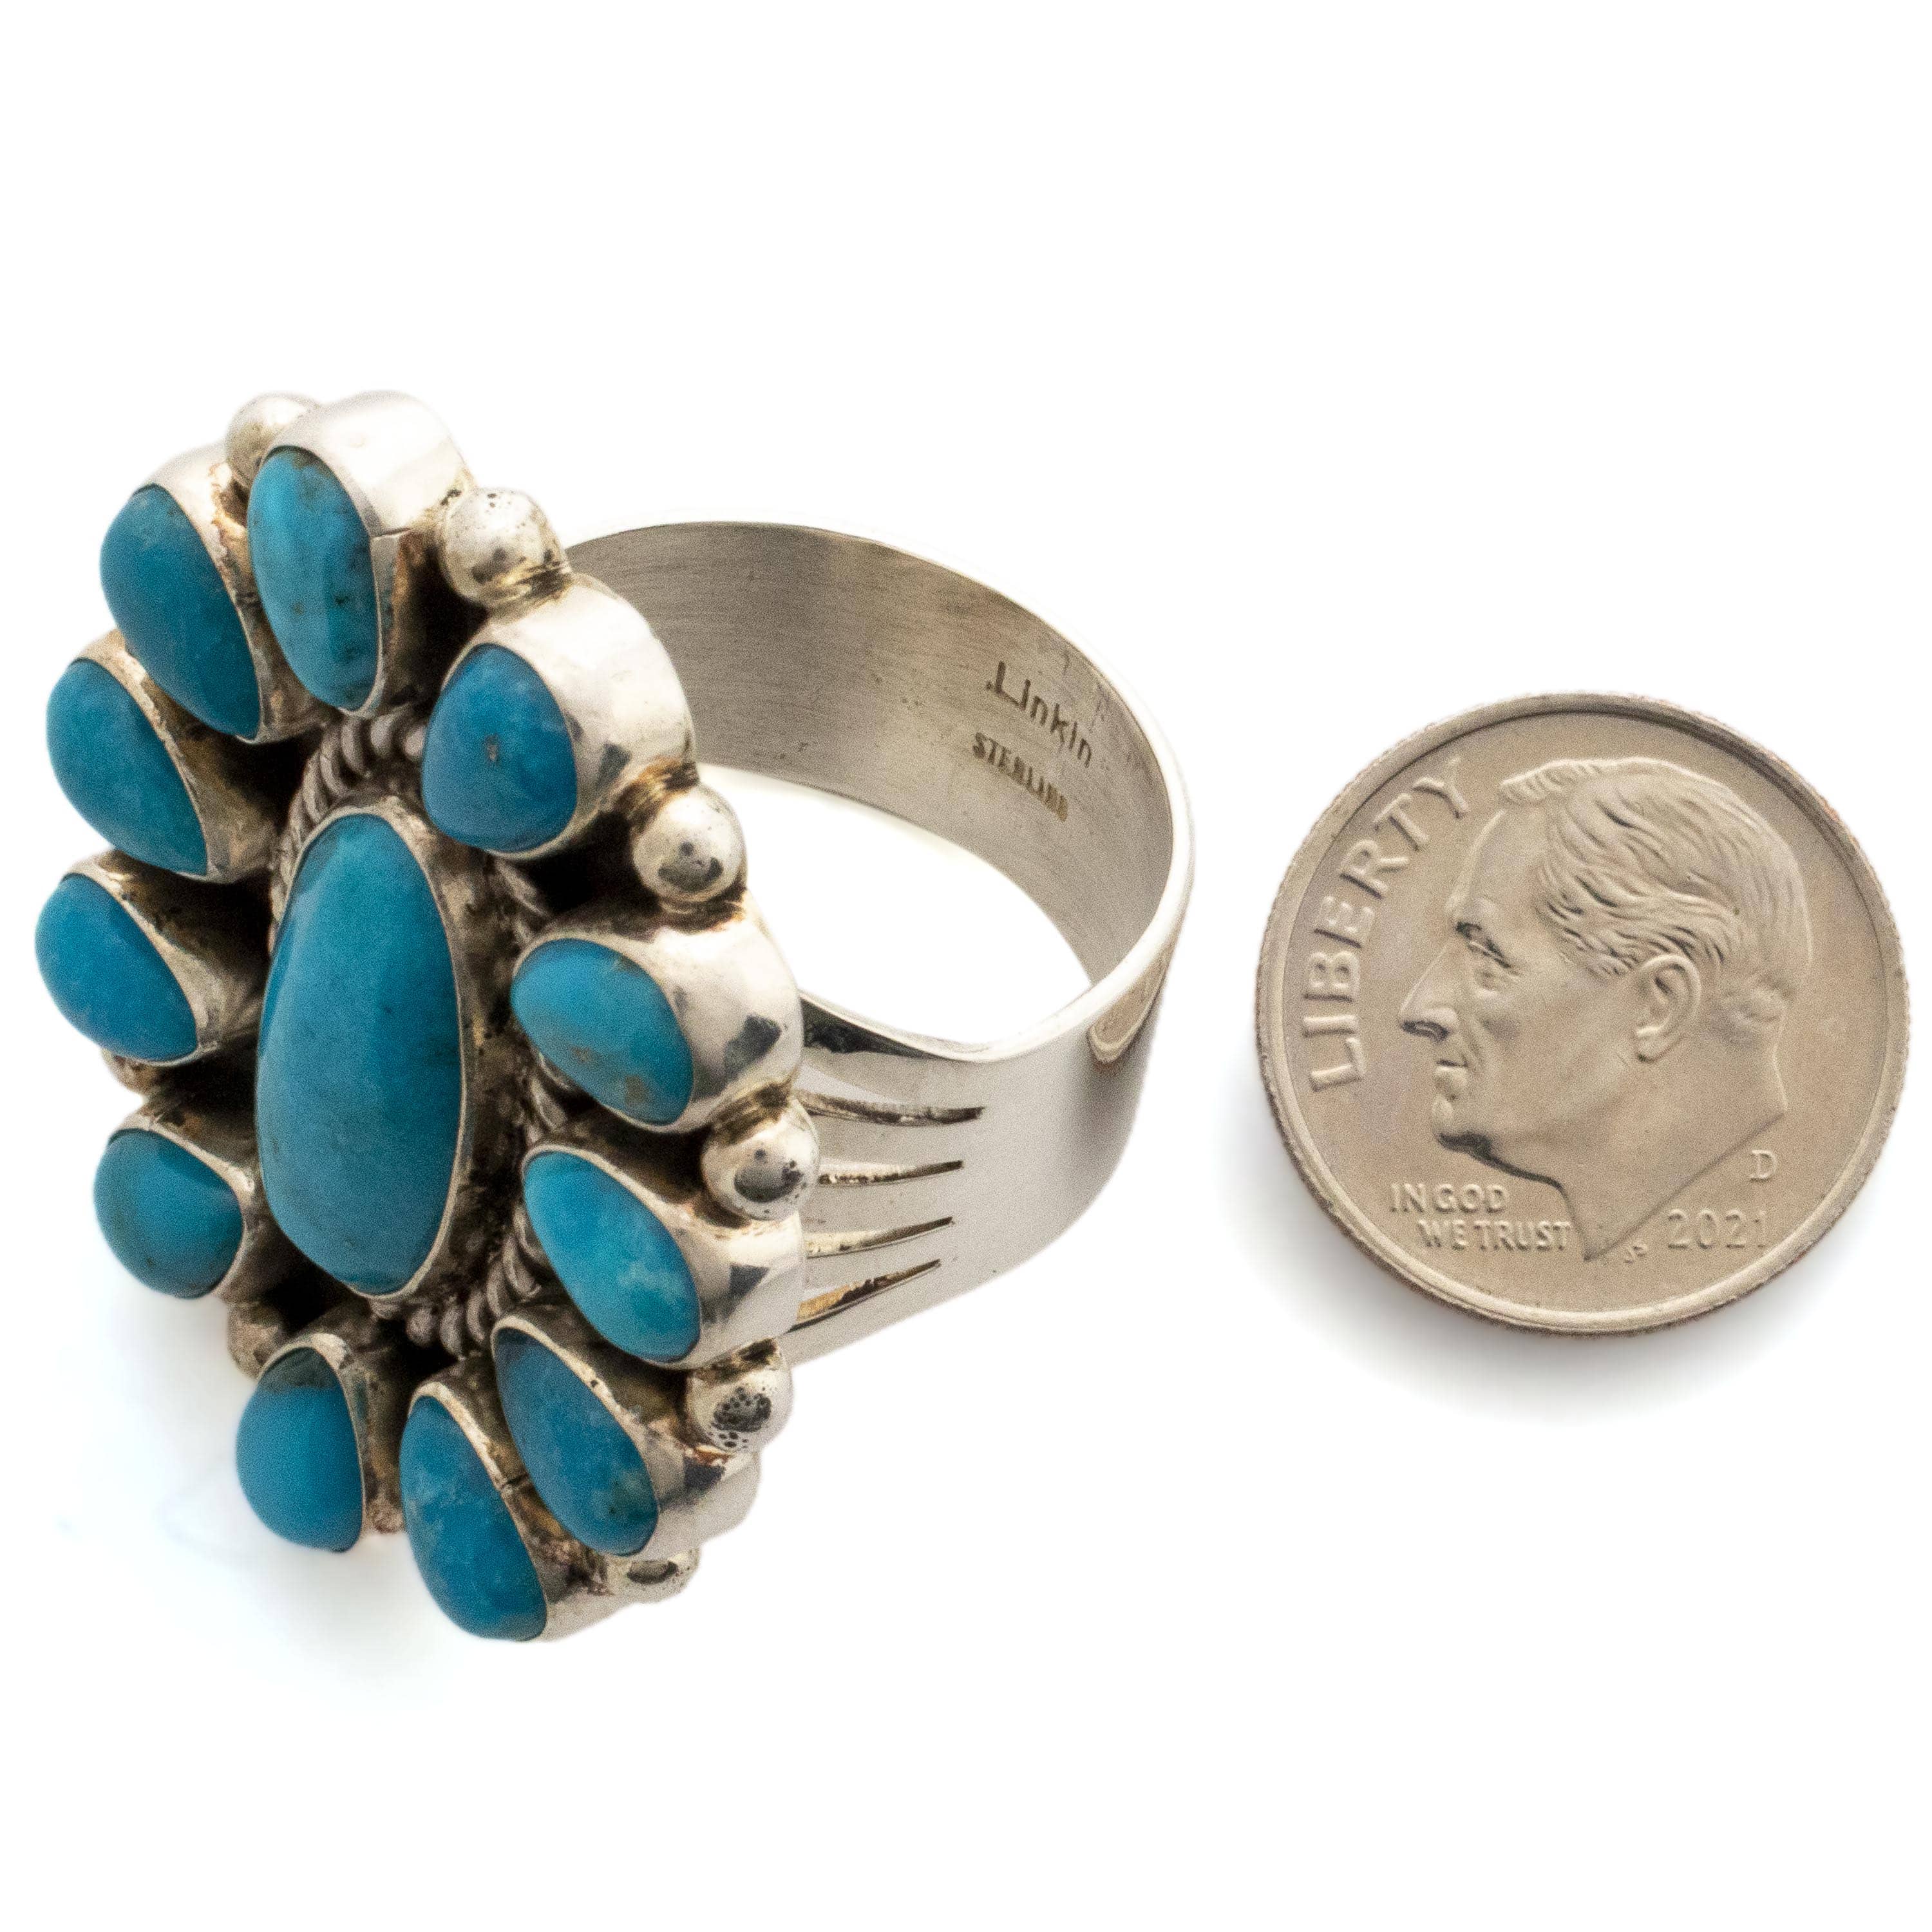 Kalifano Native American Jewelry 10.5 Lucinda Linkin Navajo Sonoran Gold Turquoise USA Native American Made 925 Sterling Silver Ring NAR1400.019.105